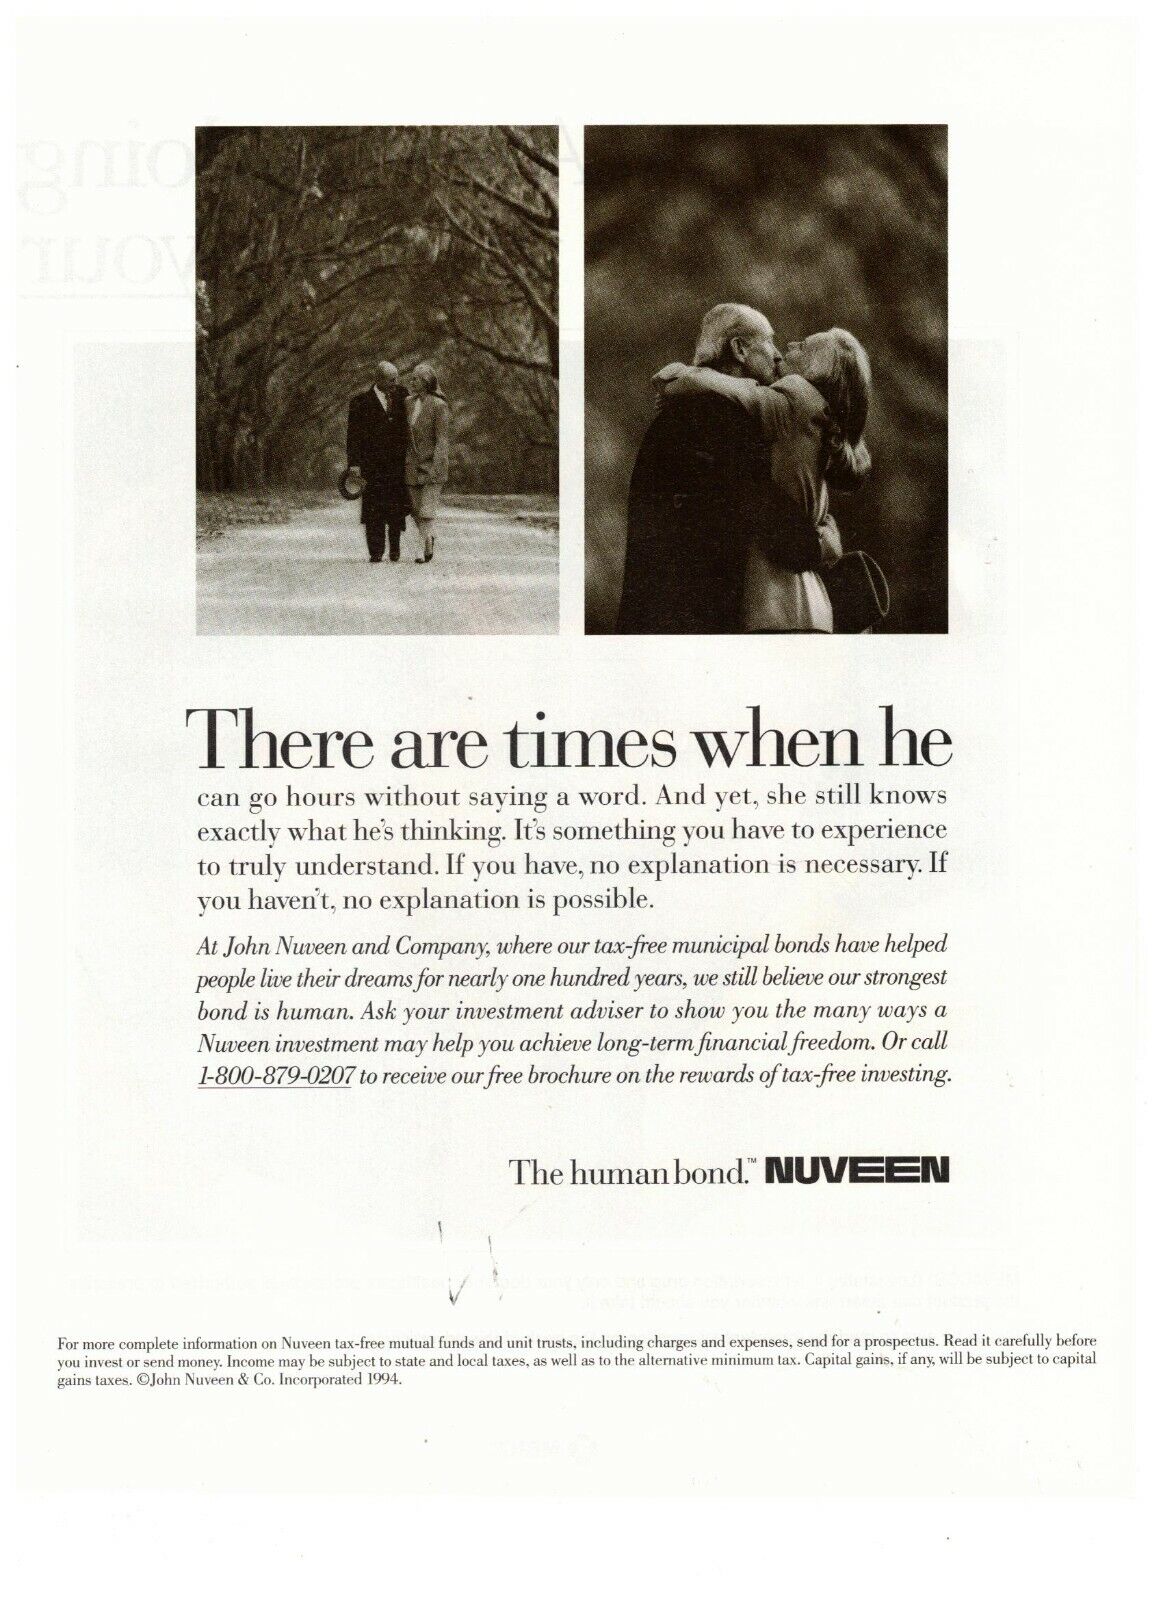 Nuveen The Human Bond Times When He Can Go 1994 Vintage Print Advertisement